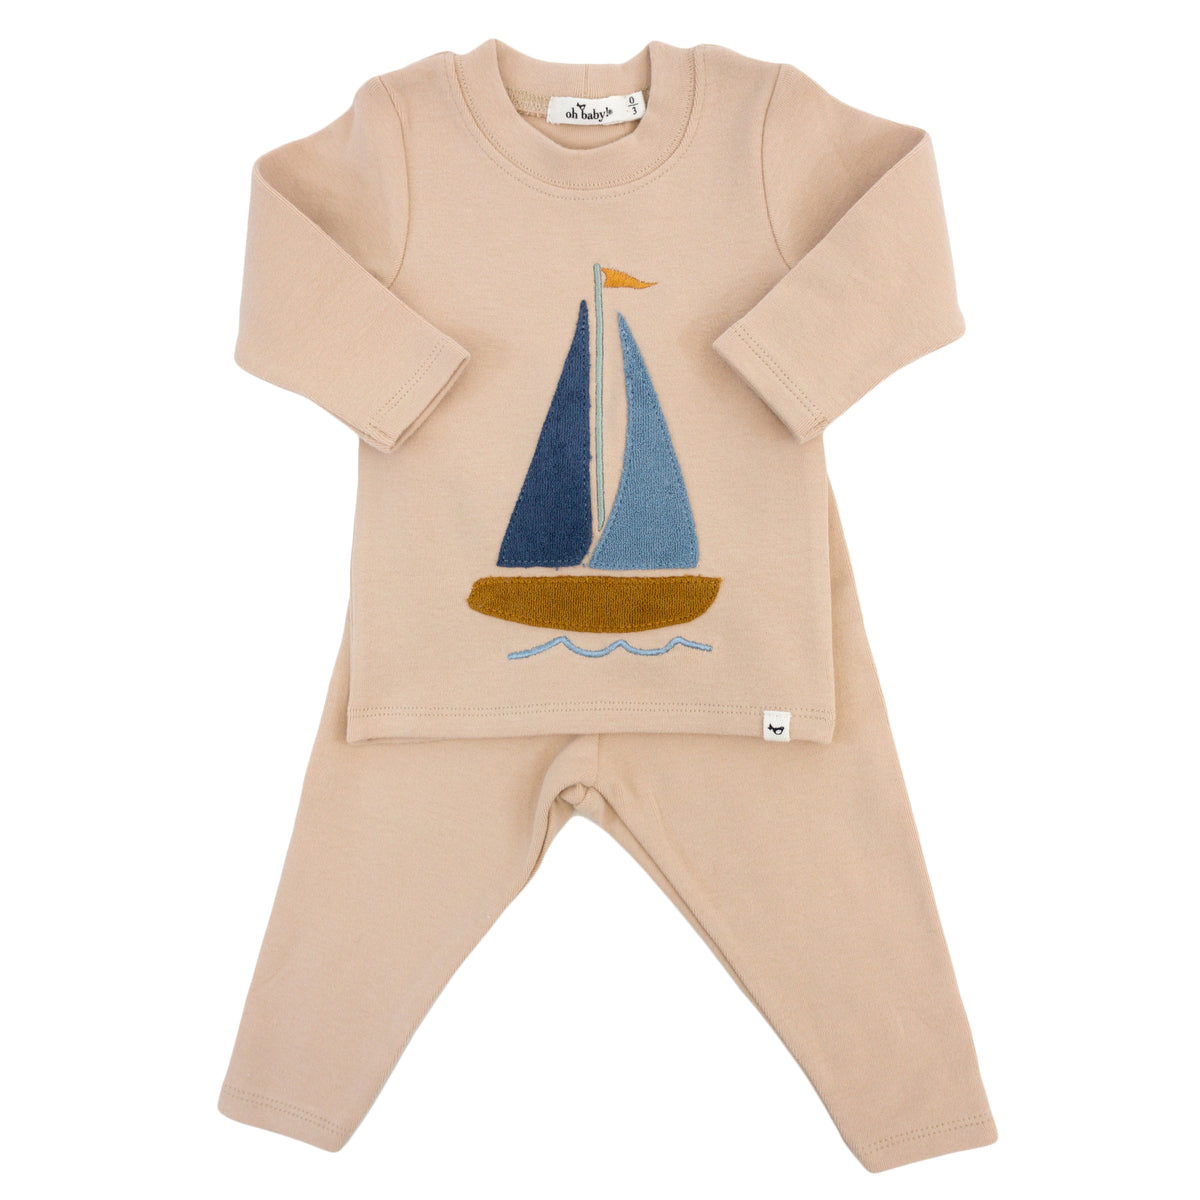 oh baby! Two Piece Set - Sailboat Applique - Almond